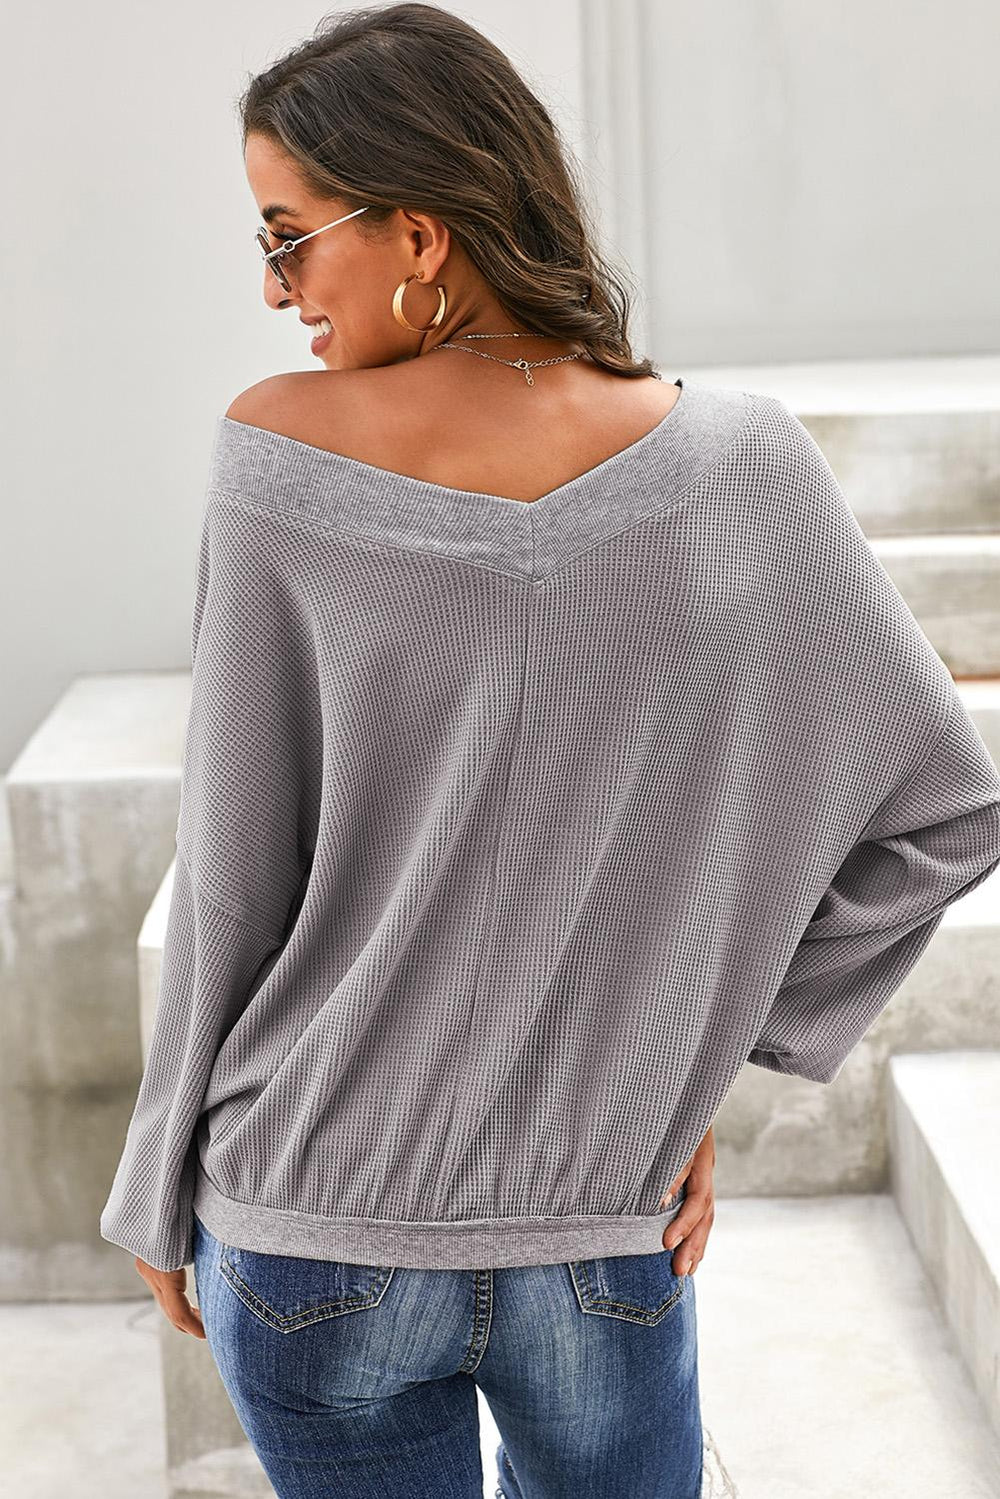 Gray V Neck Our Country Roads Thermal Top